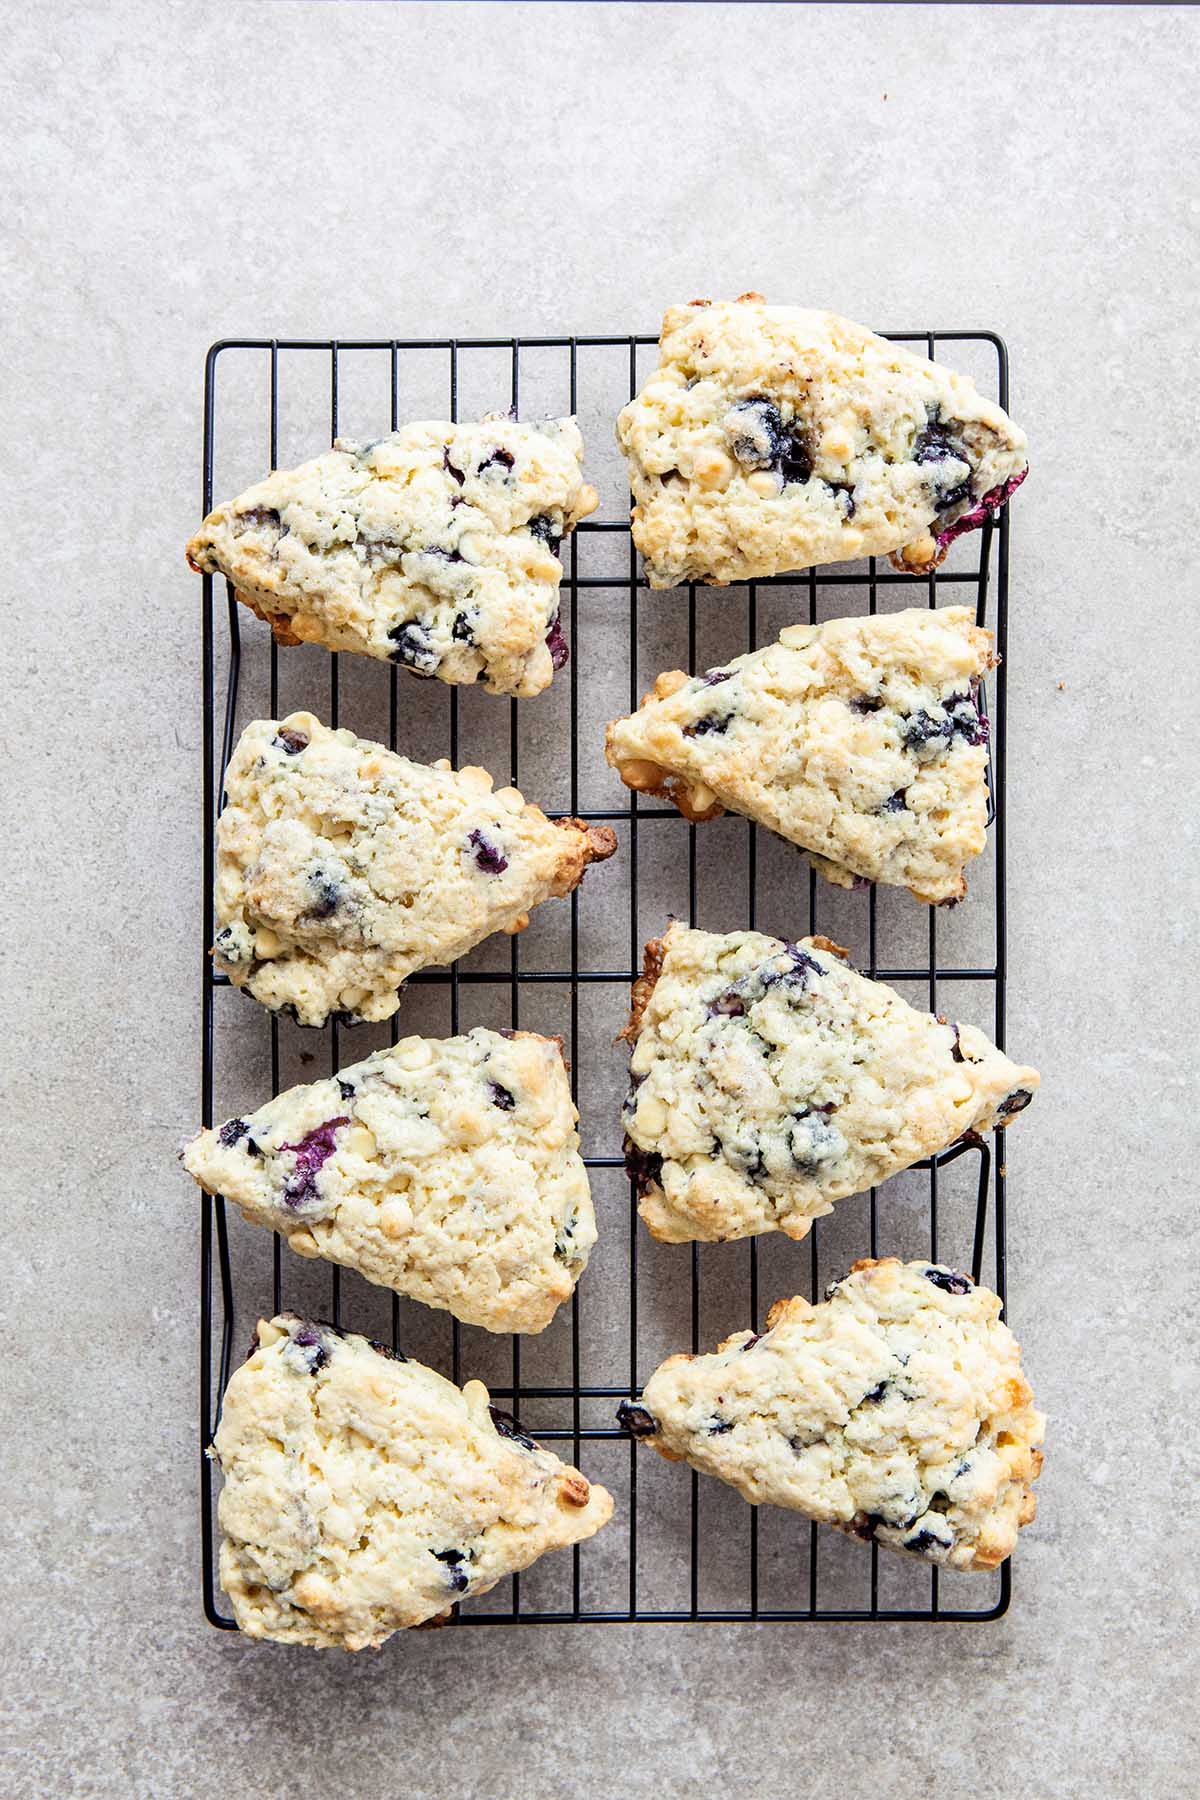 Eight blueberry white chocolate scones cooling on a rack set on a stone surface.